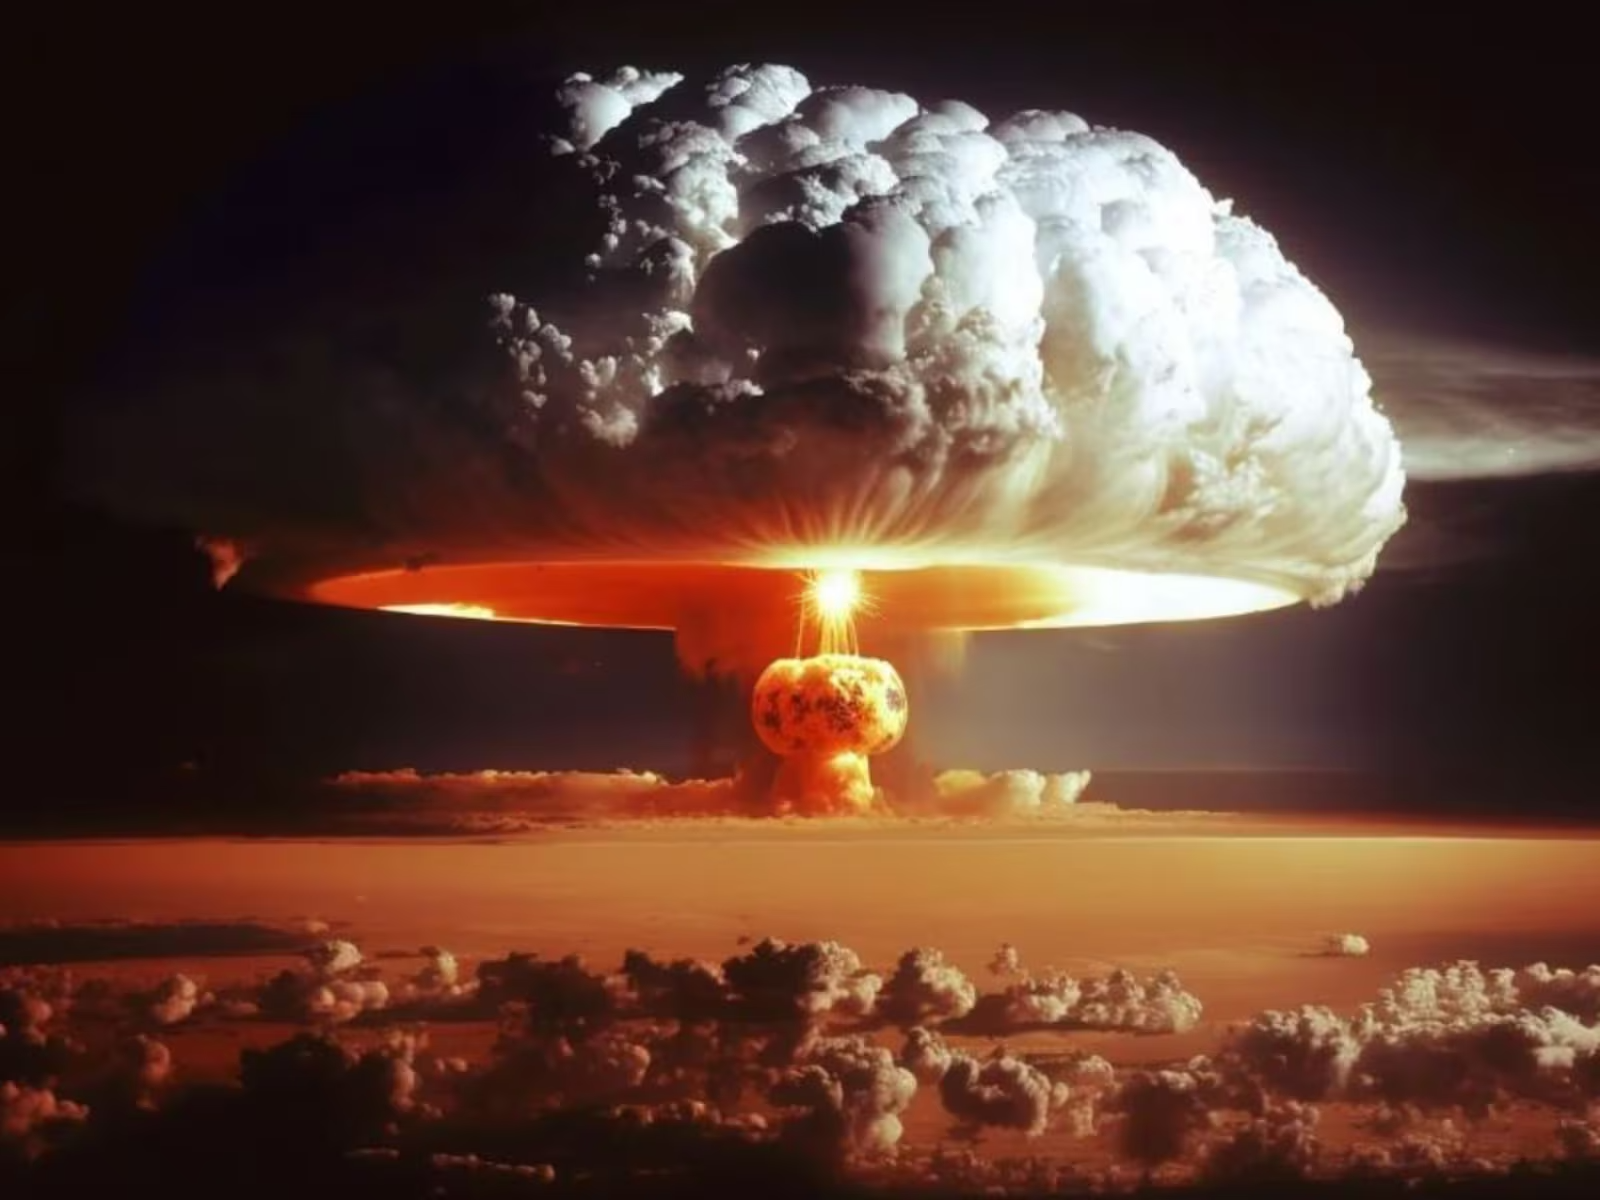 “When something can do anything, I’m worried” – Warren Buffett compared AI to the creation of an atomic bomb